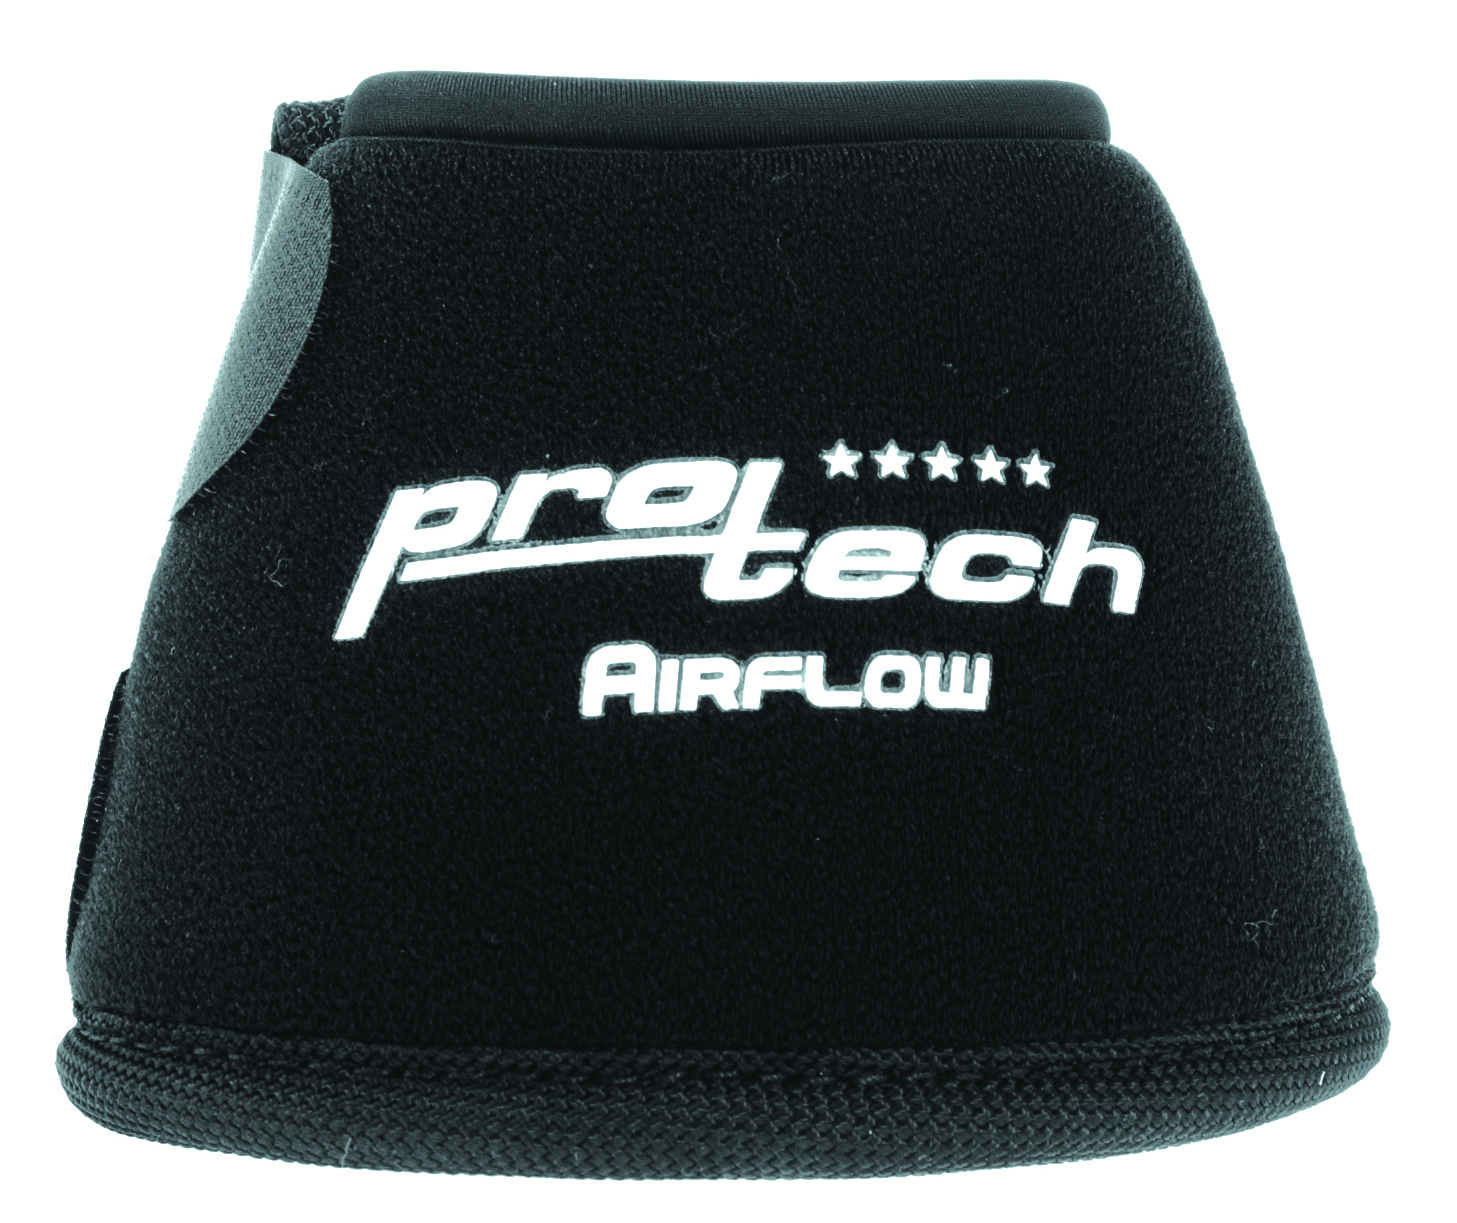 Protech Airflow Bell Boots     Small  Black